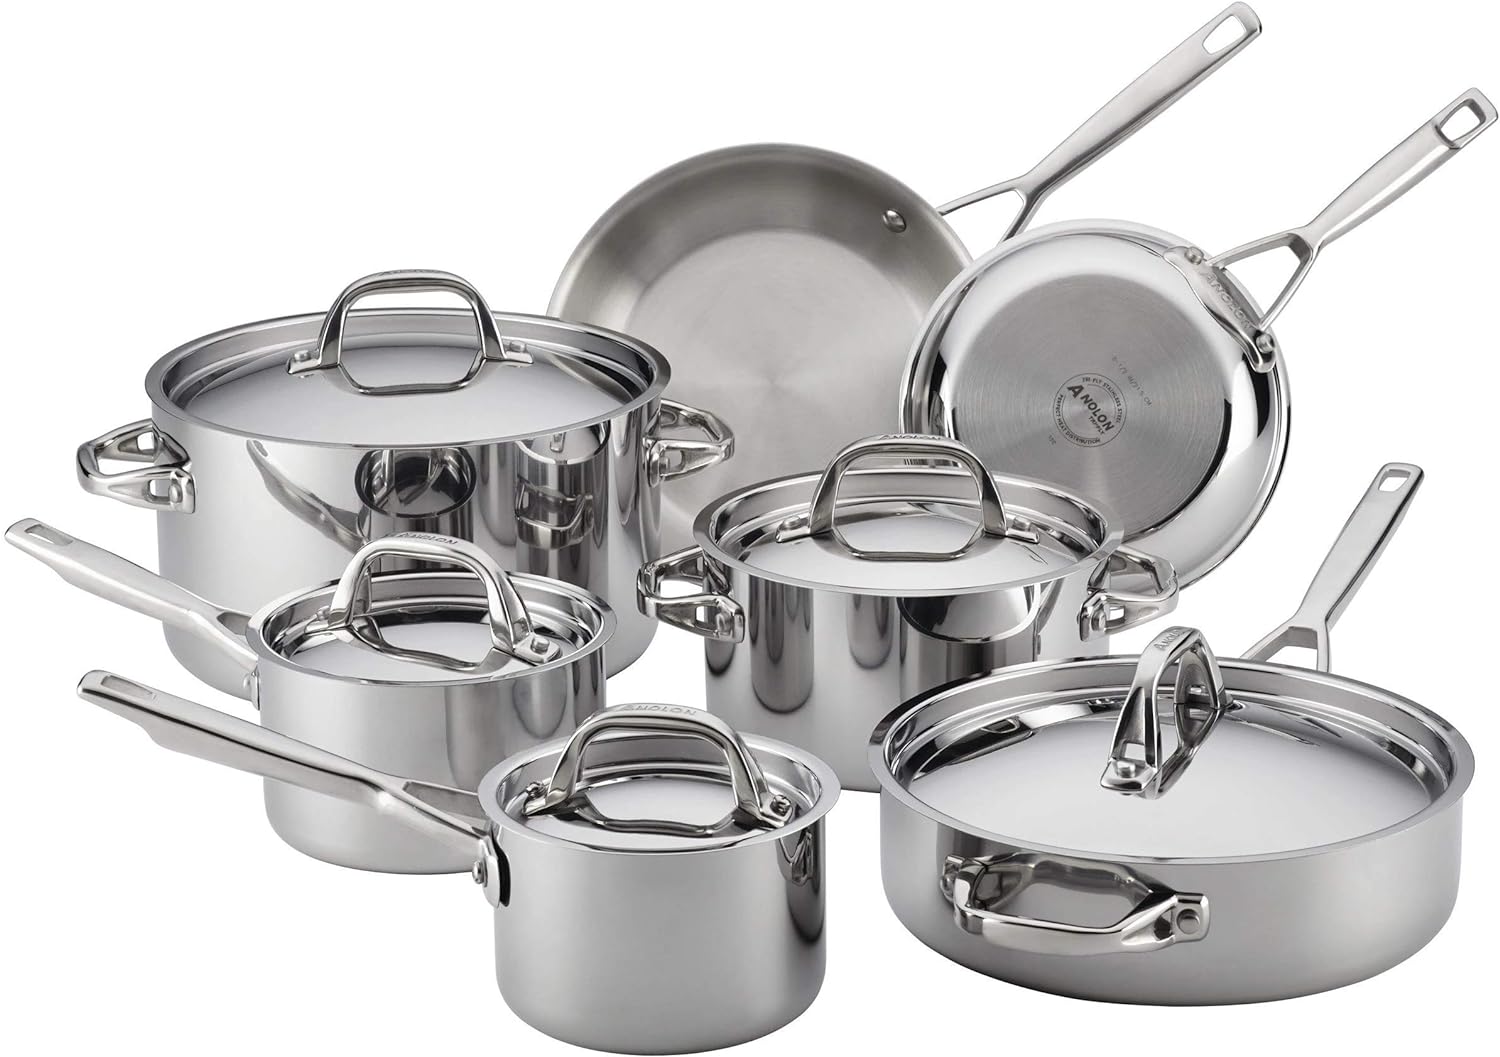 Anolon Tri-Ply 12-piece Stainless Cookware Set